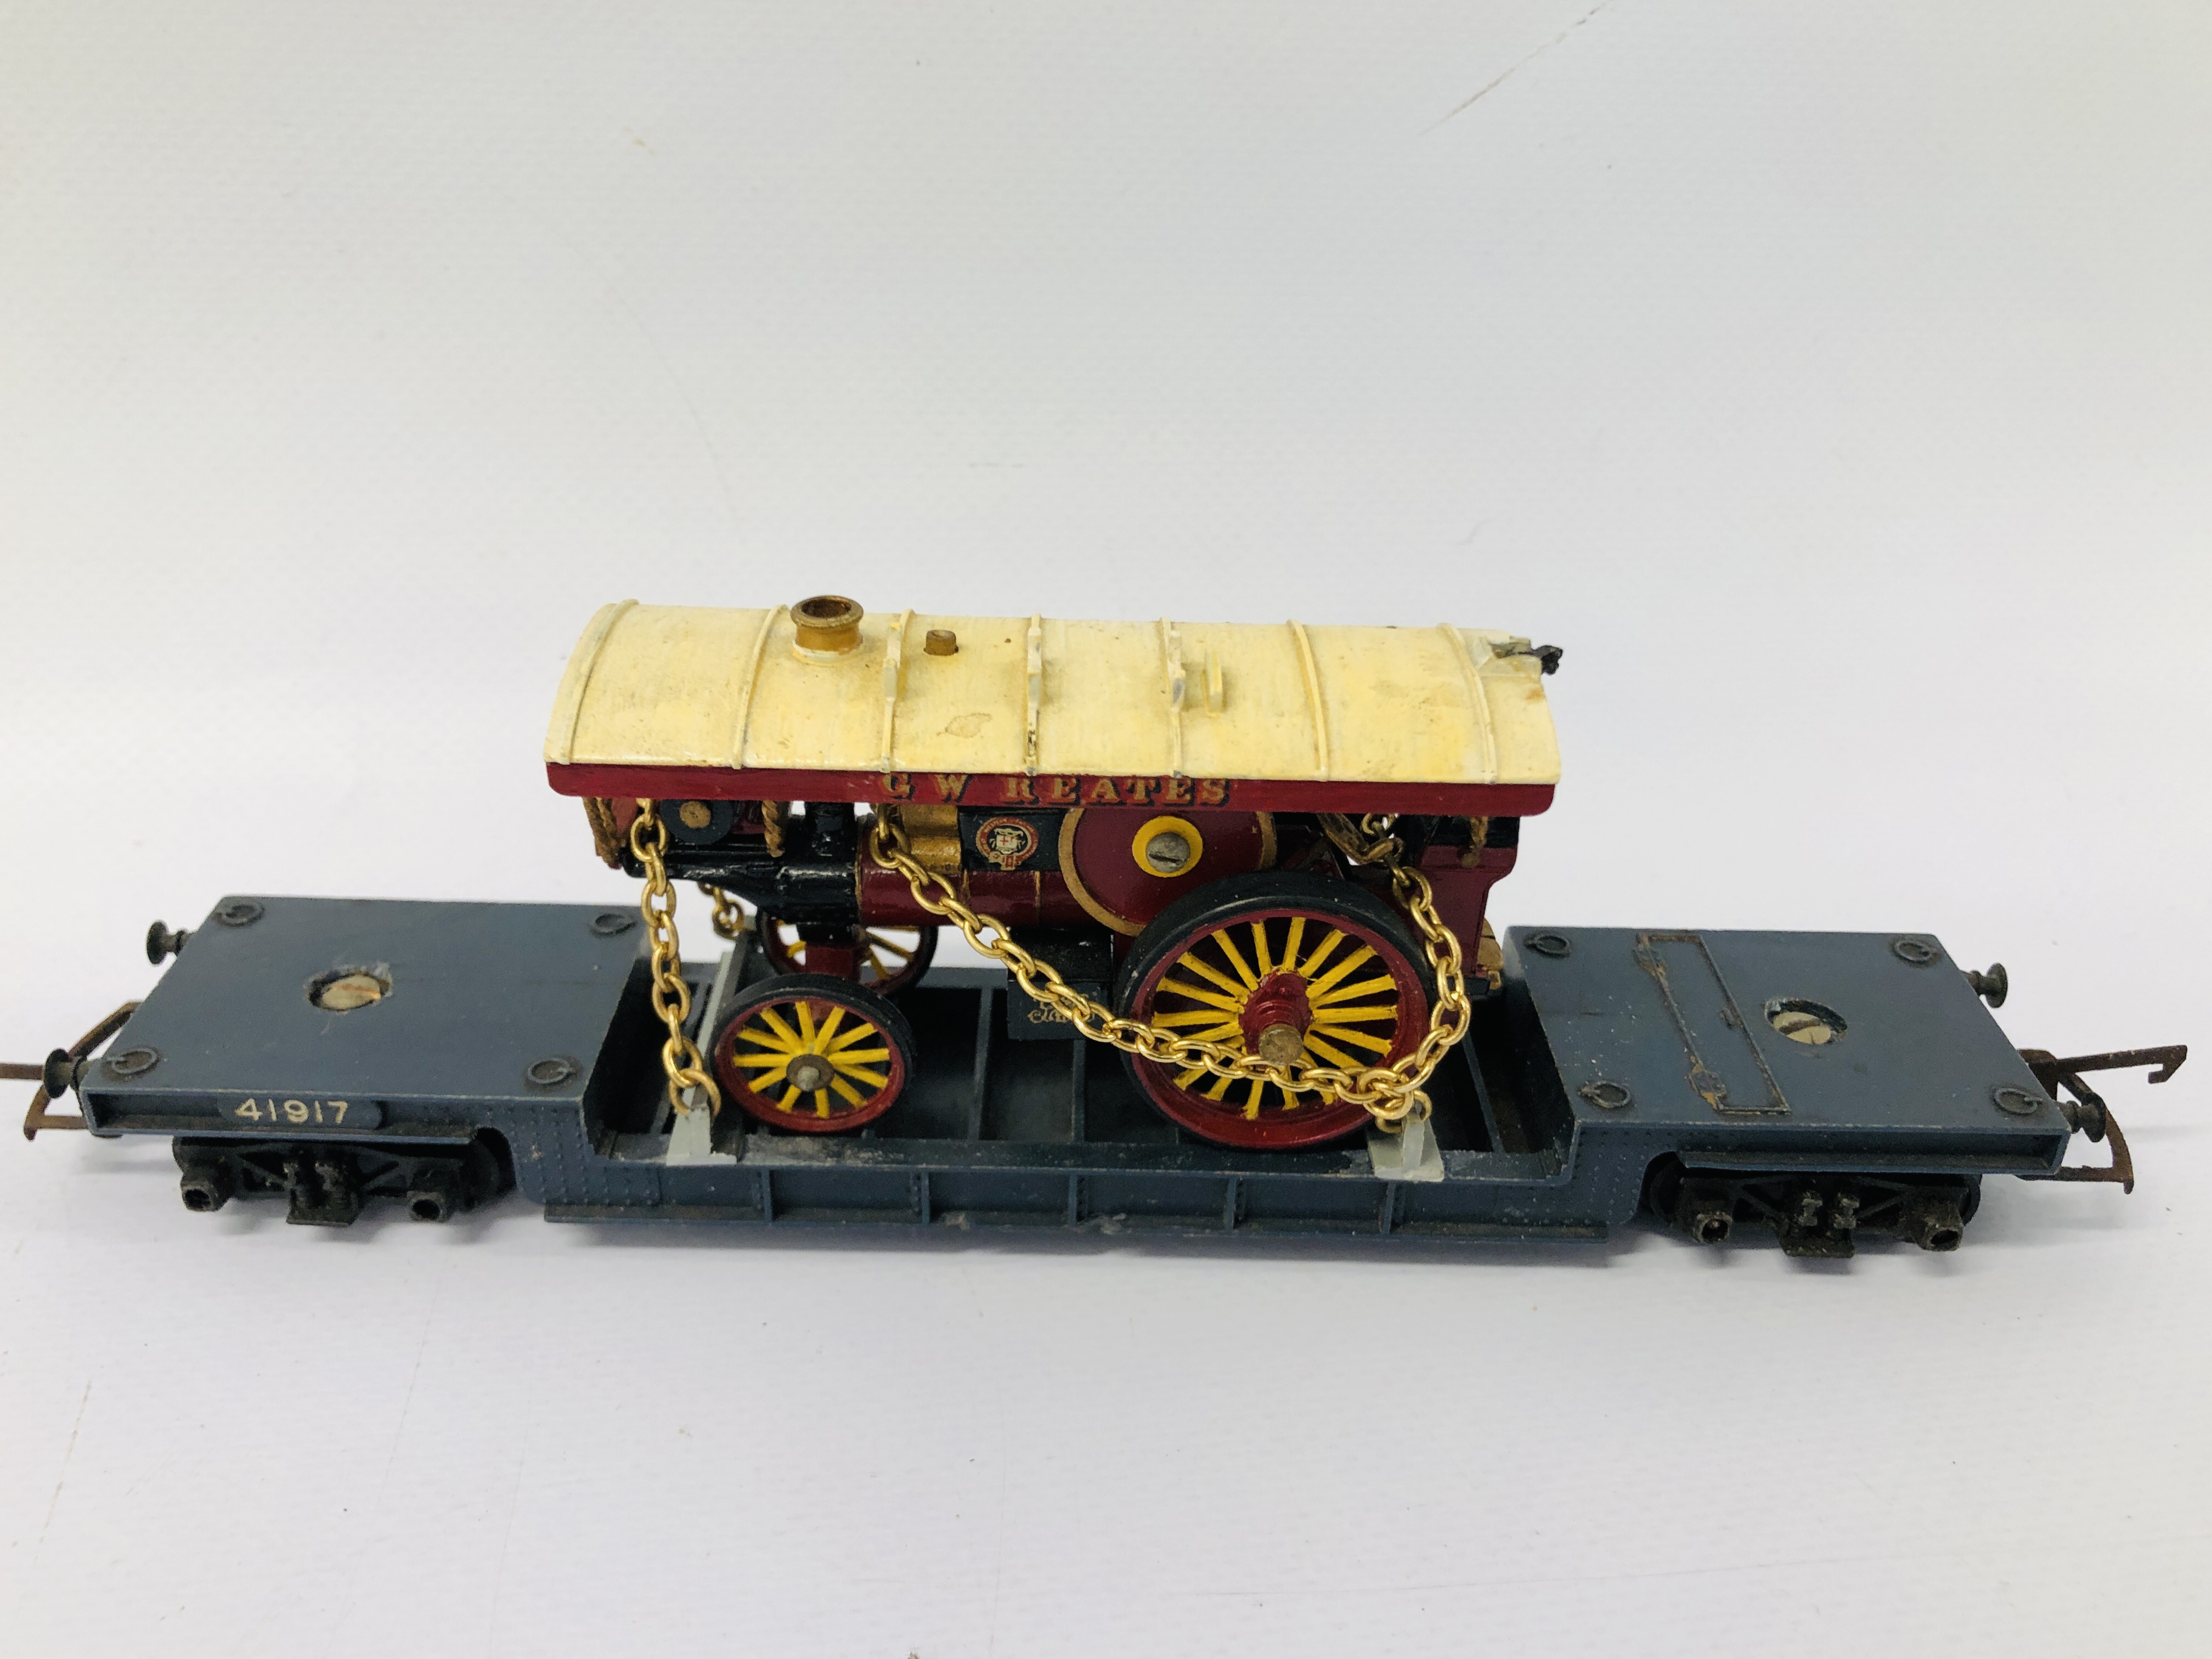 A HORNBY DUBO MECCANO 00 GAUGE DUCHESS OF MONTROSE LOCOMOTIVE & 3 TRIANG 00 GAUGE WAGONS WITH CARGO - Image 10 of 14